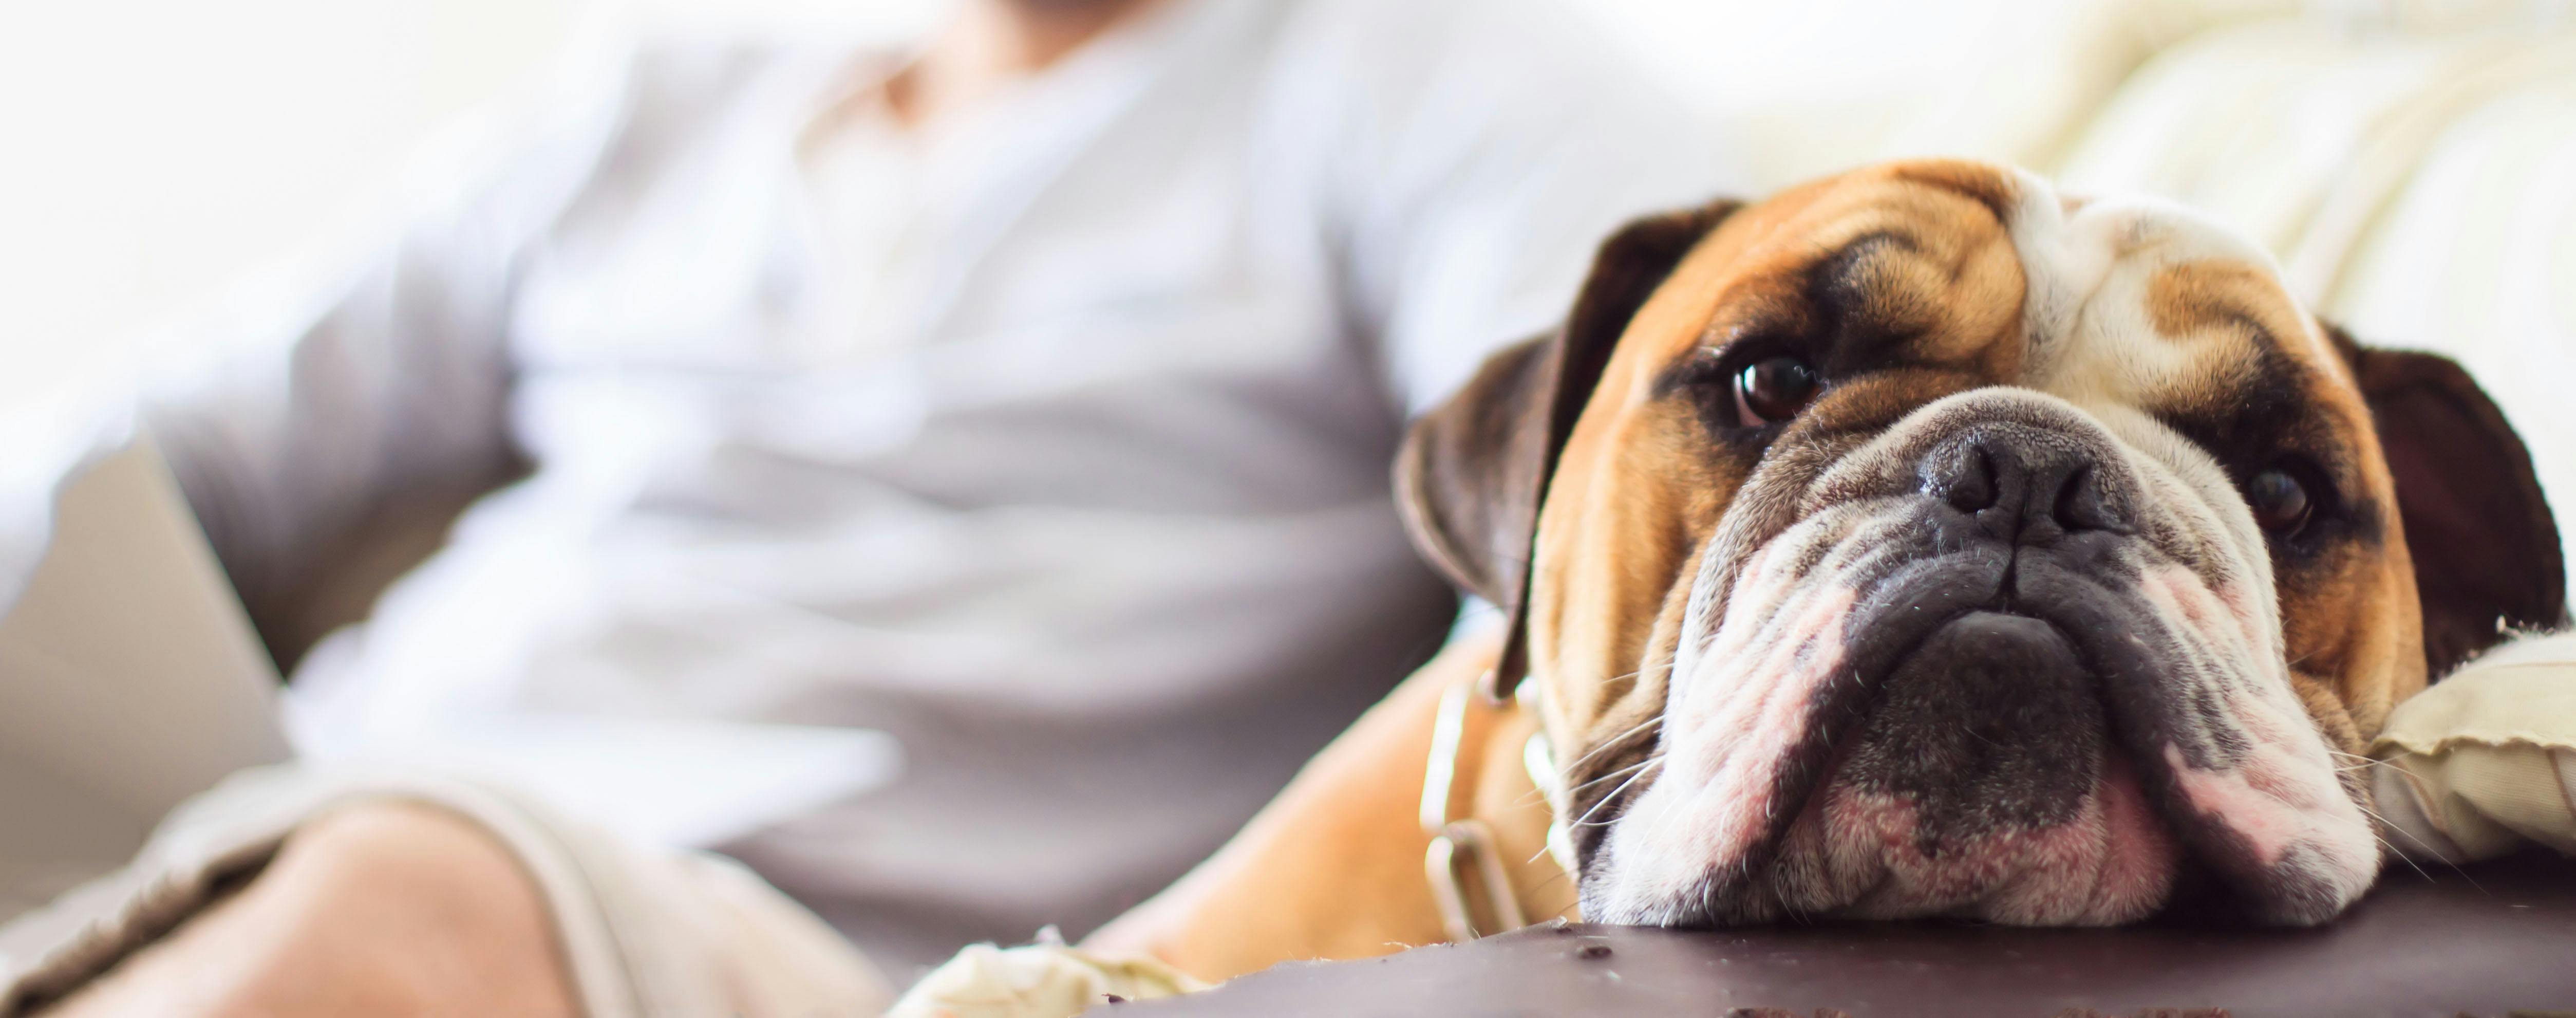 wellness-how-to-prevent-your-dog-from-getting-on-the-couch-hero-image